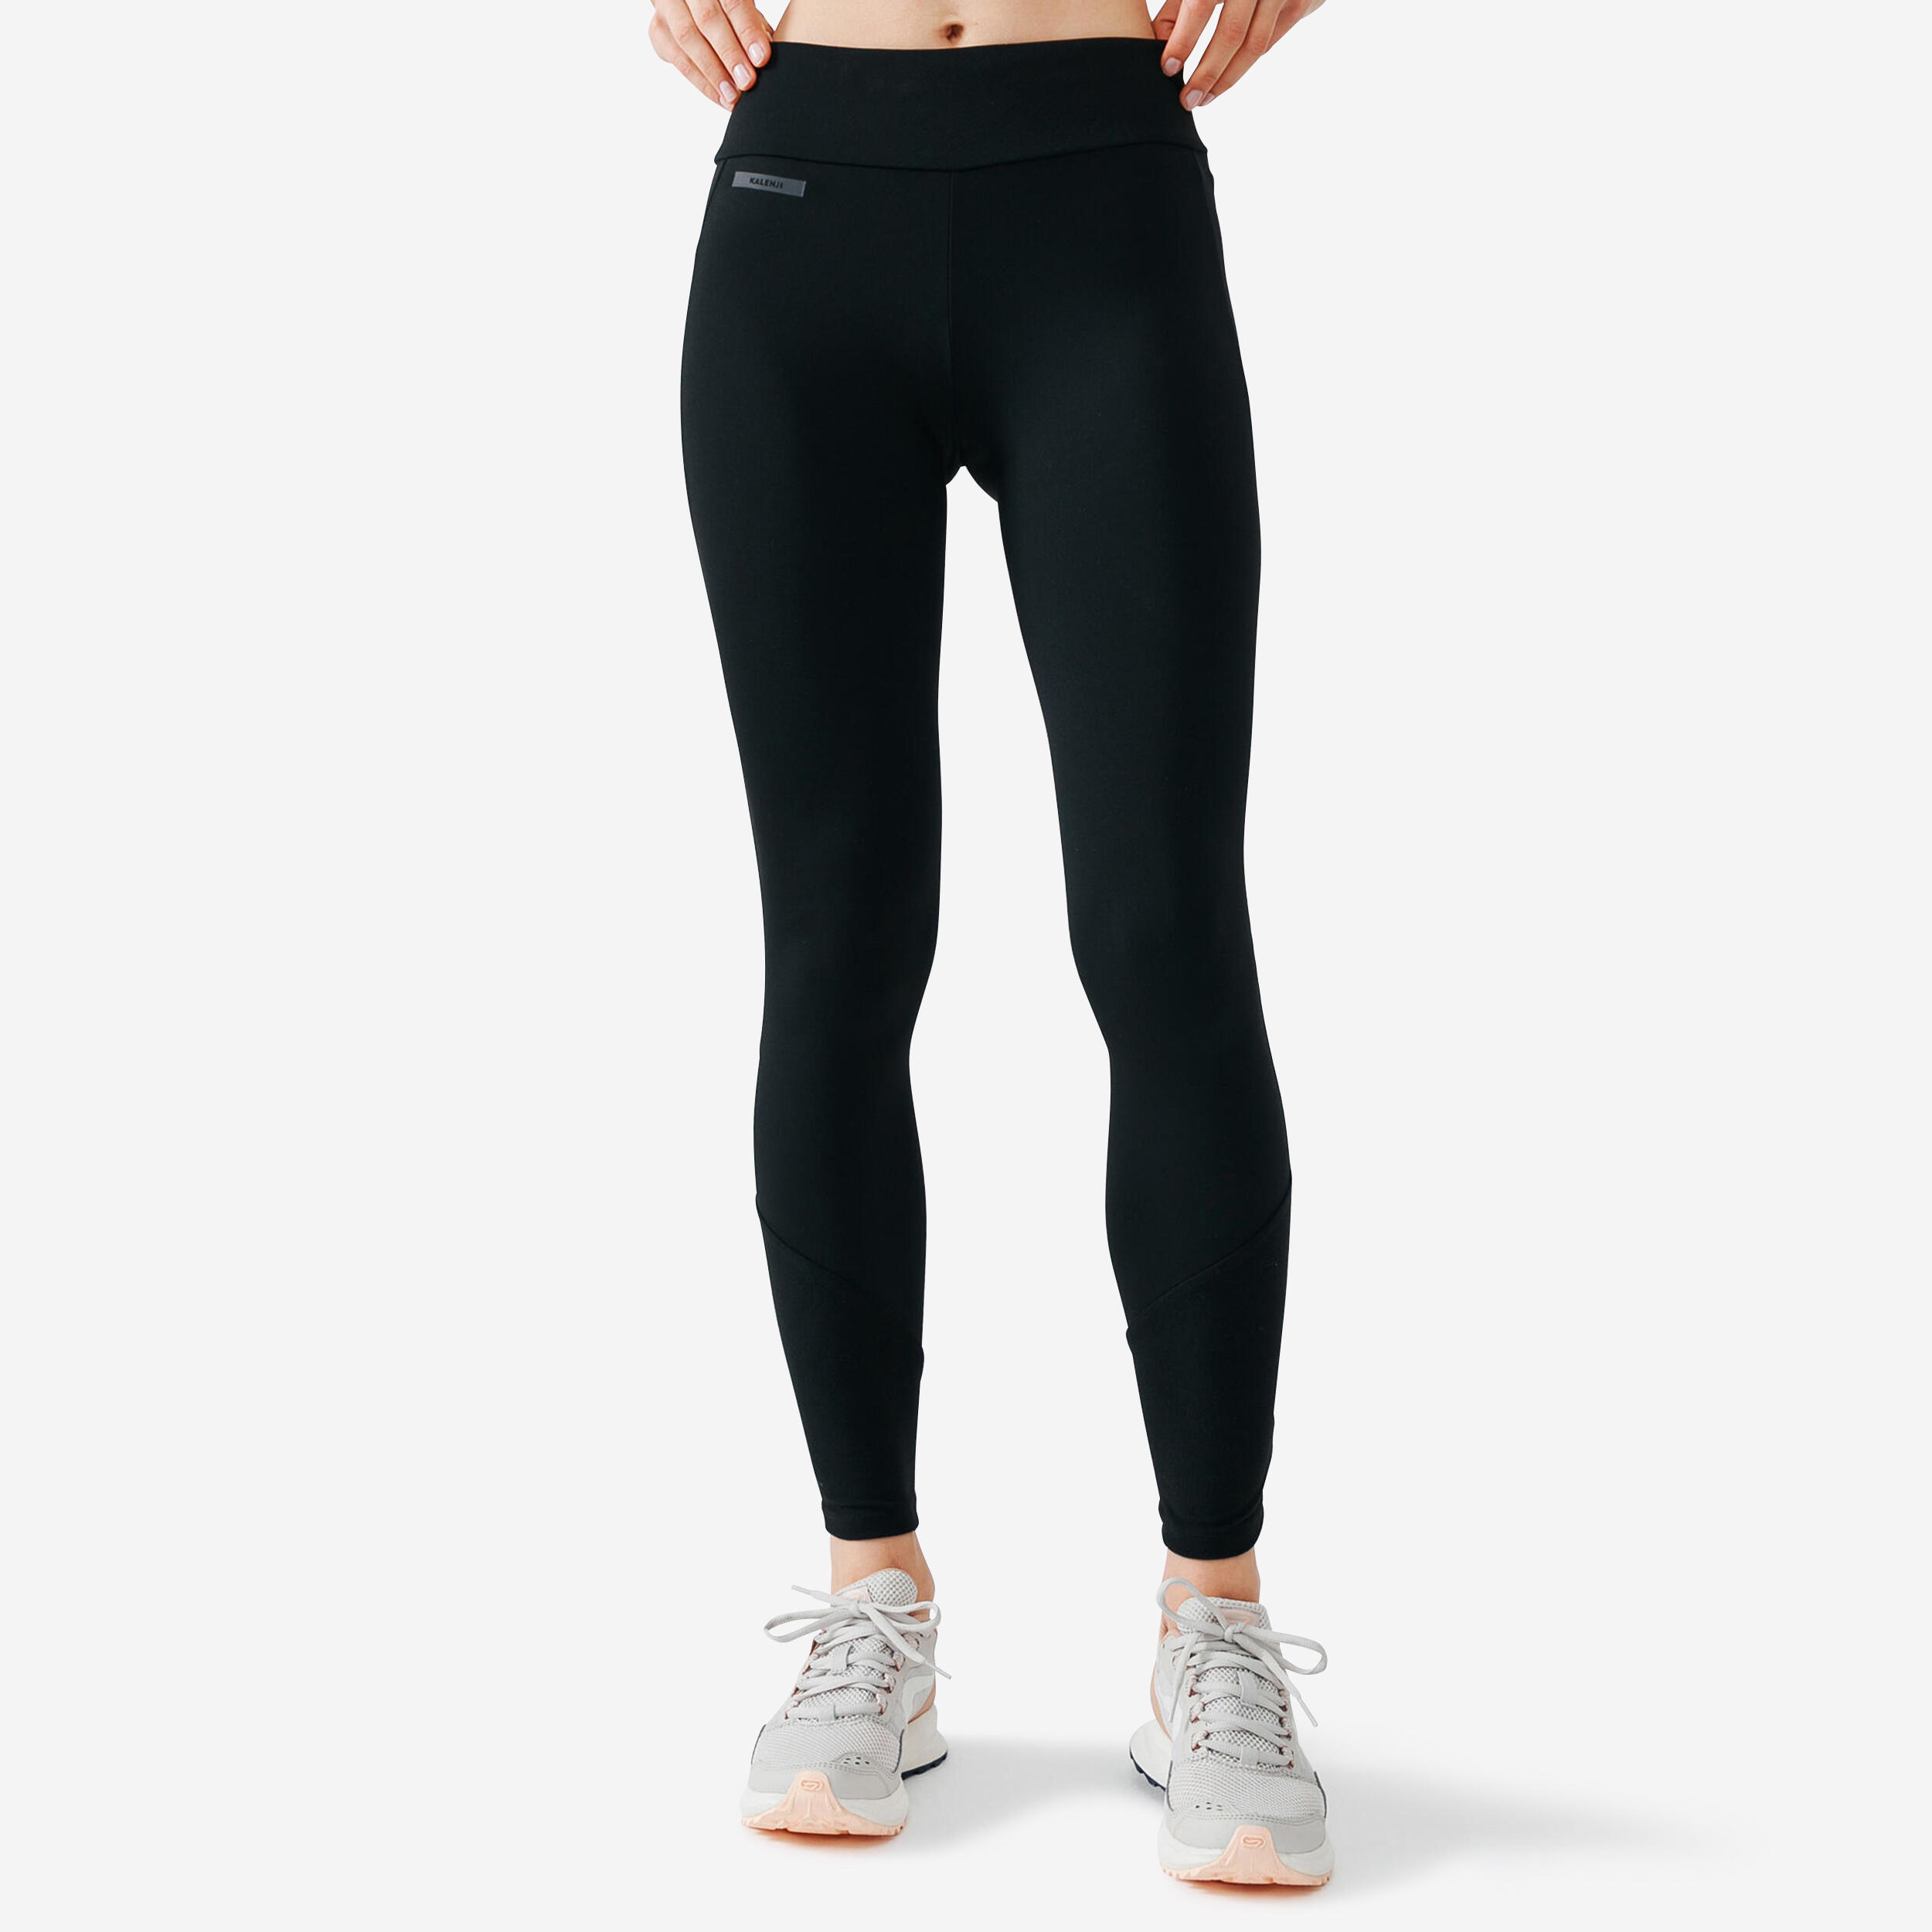 Buy Athleisure Wear for Women Online in India | amanté